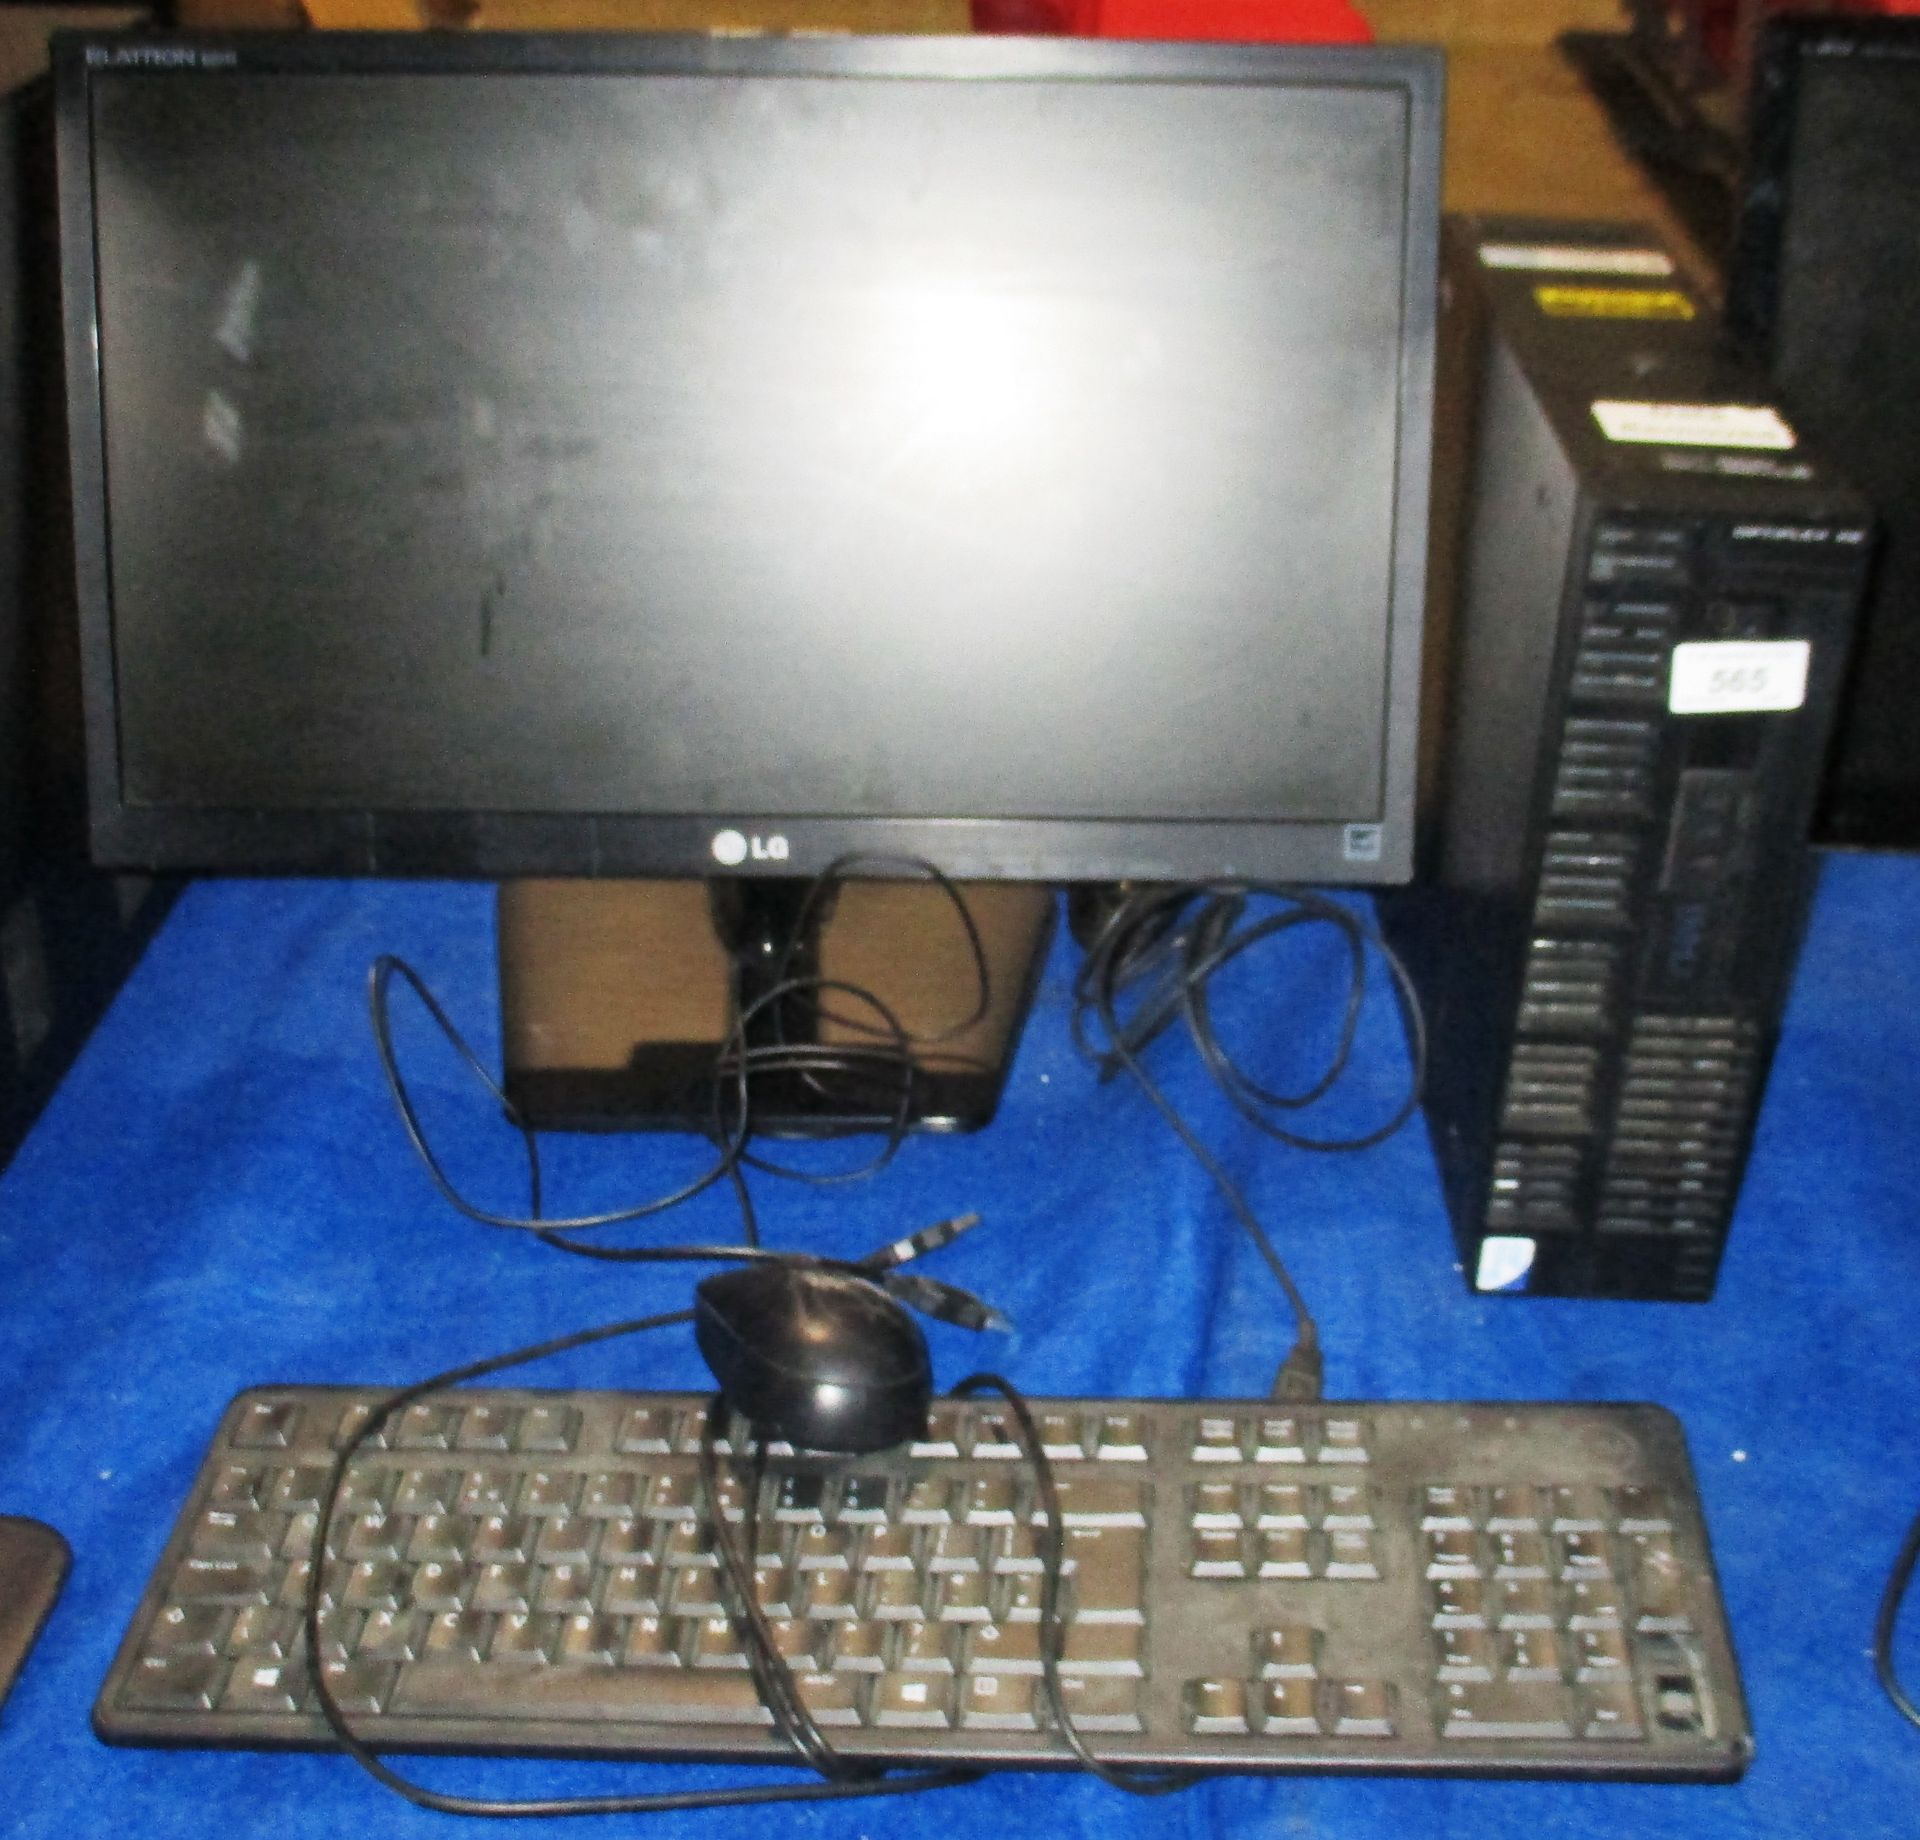 A Dell Optiplex XE desktop computer - power lead complete with a LG 22" LCD monitor - power lead,